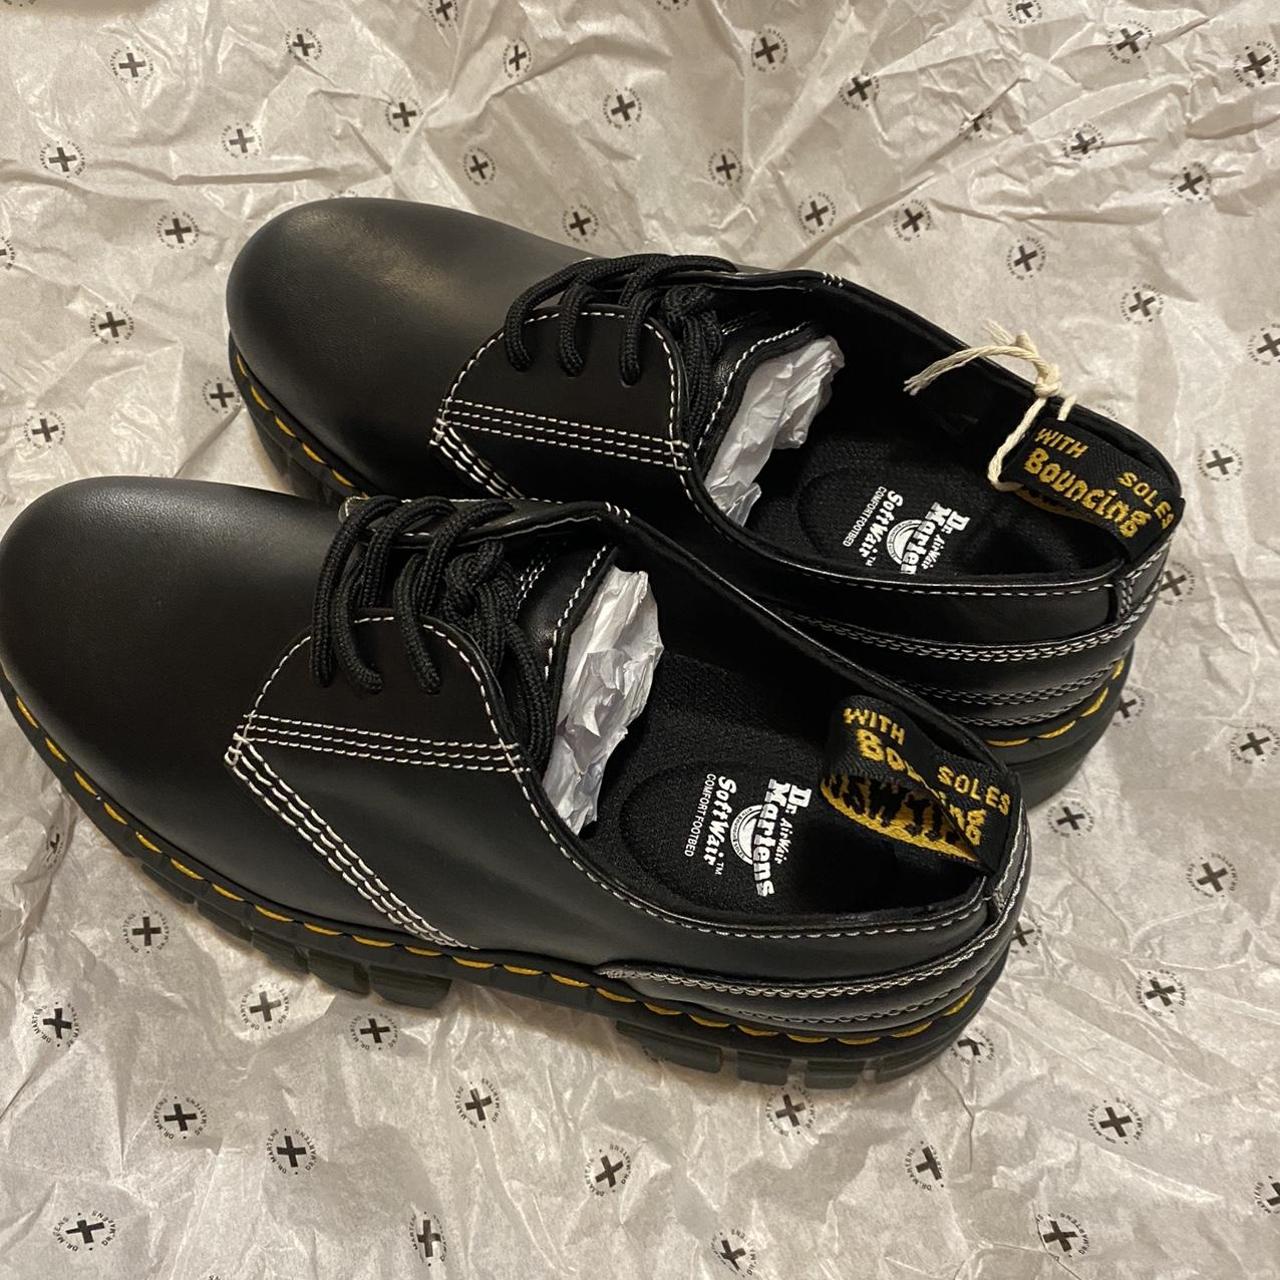 Dr. Martens Women's Black and White Boots (2)